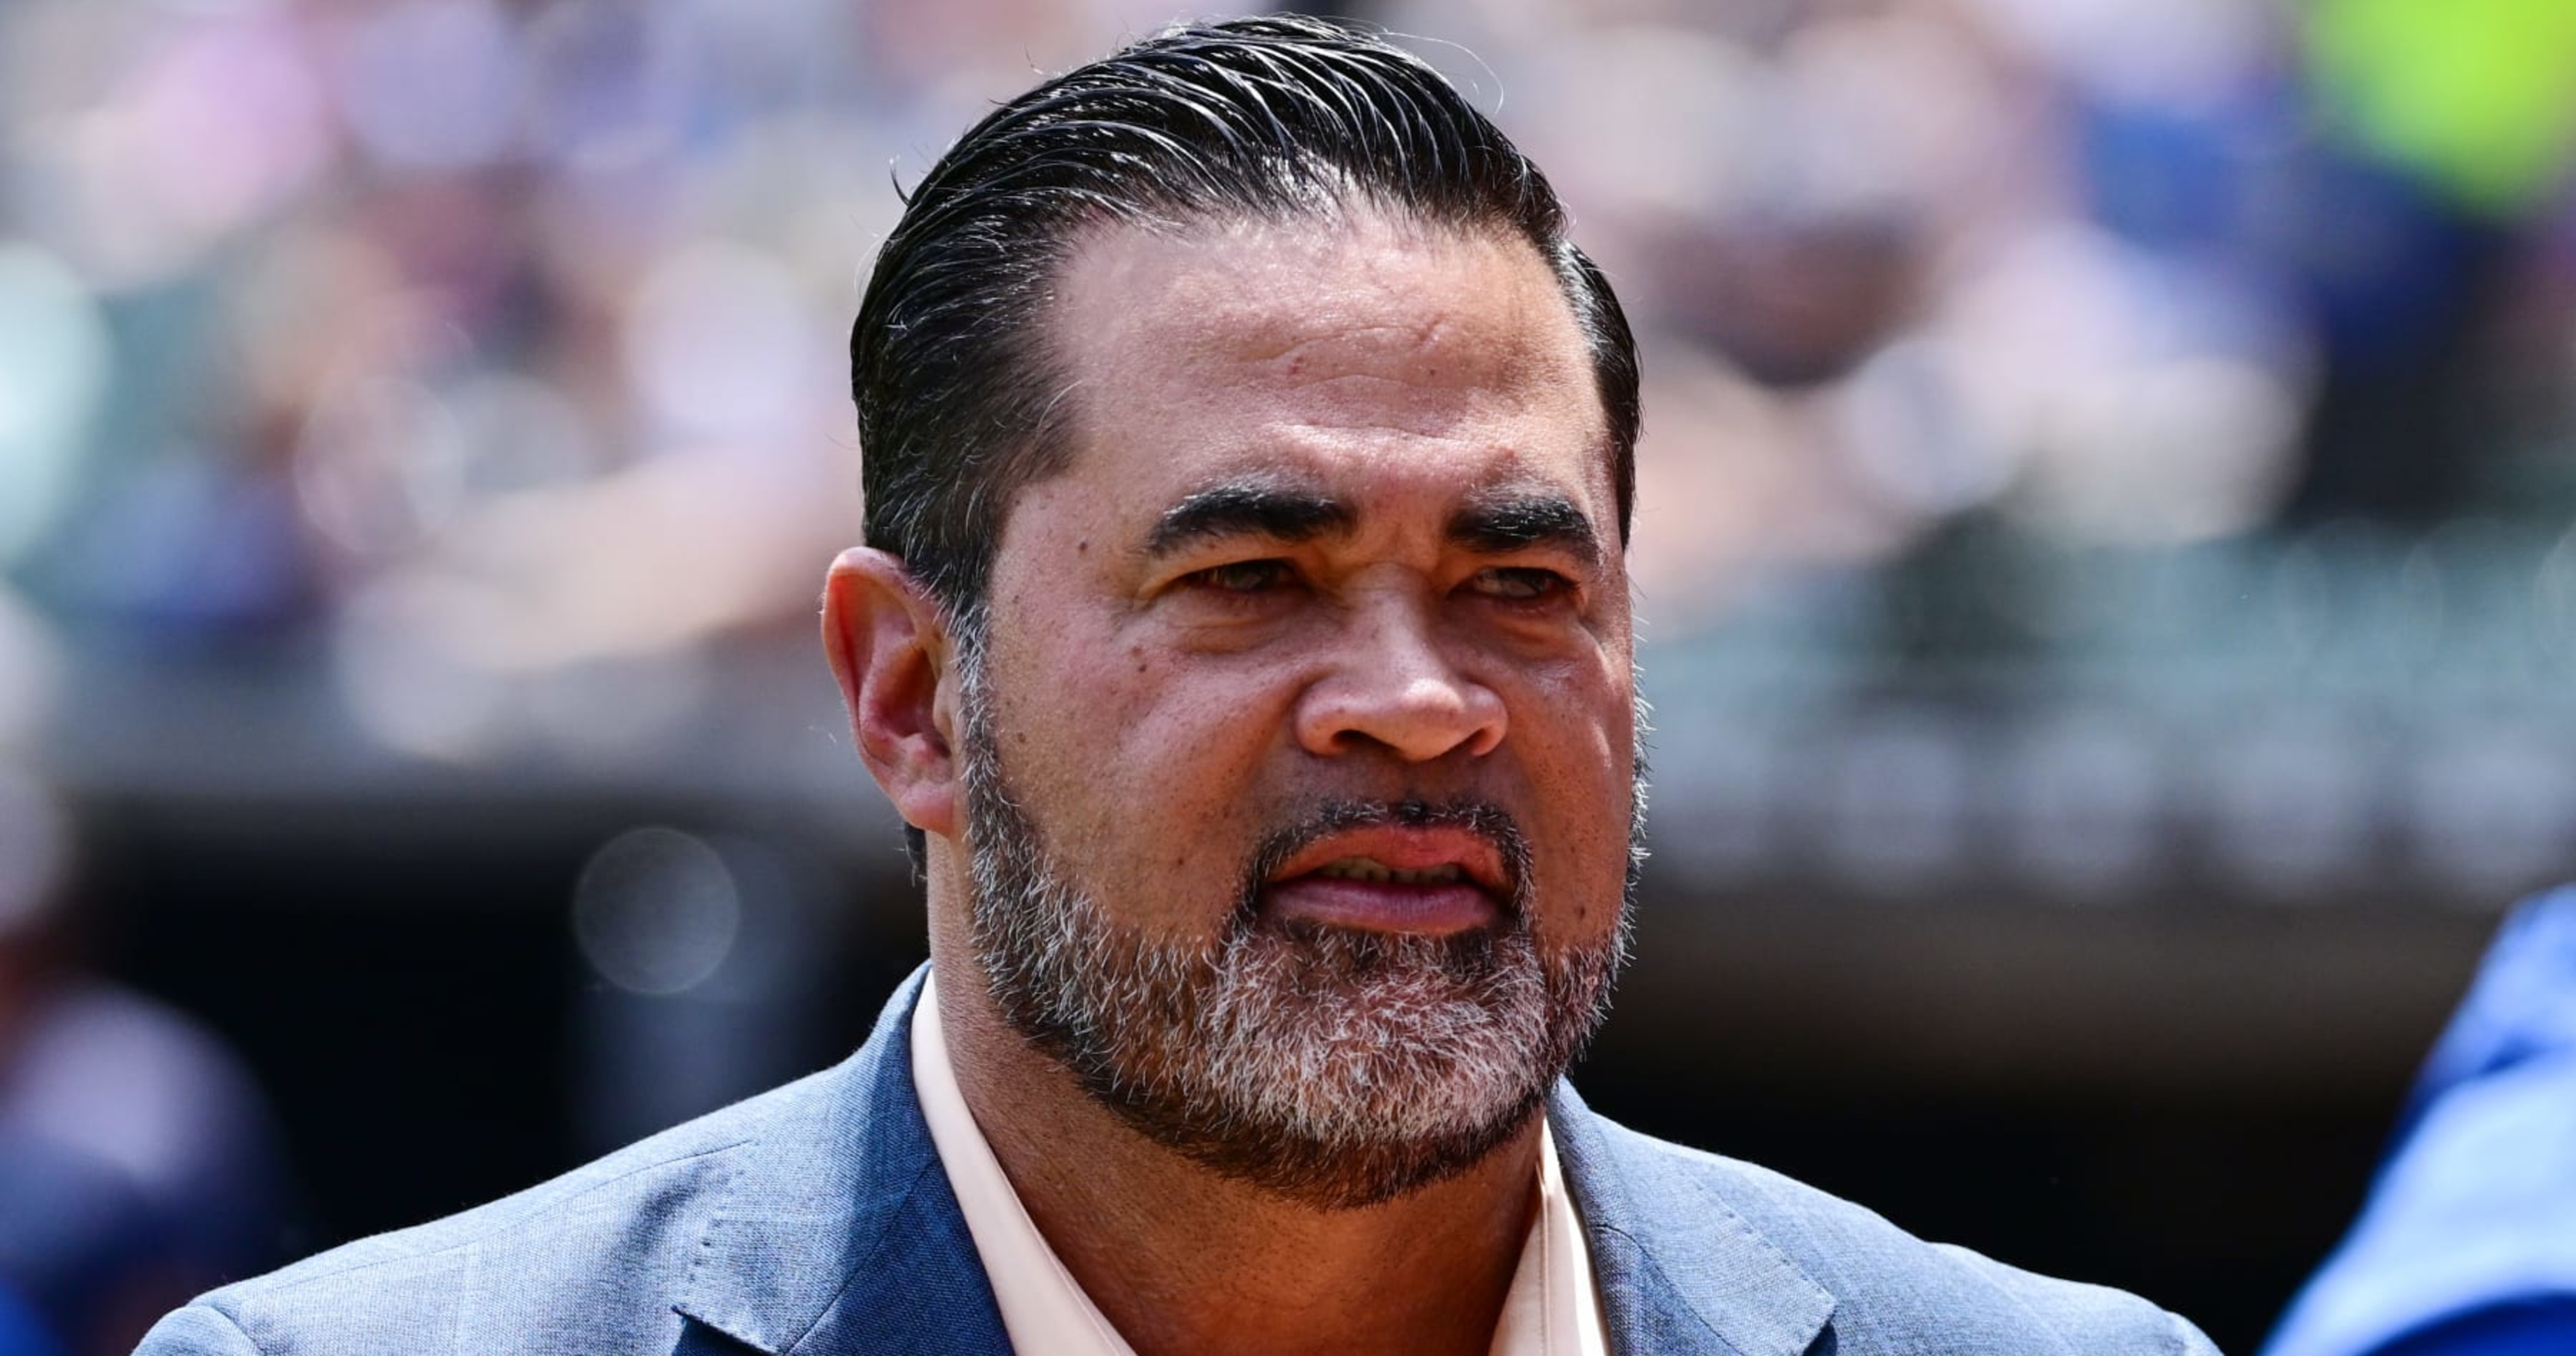 MLB Rumors: Ozzie Guillén to Interview for White Sox Managerial